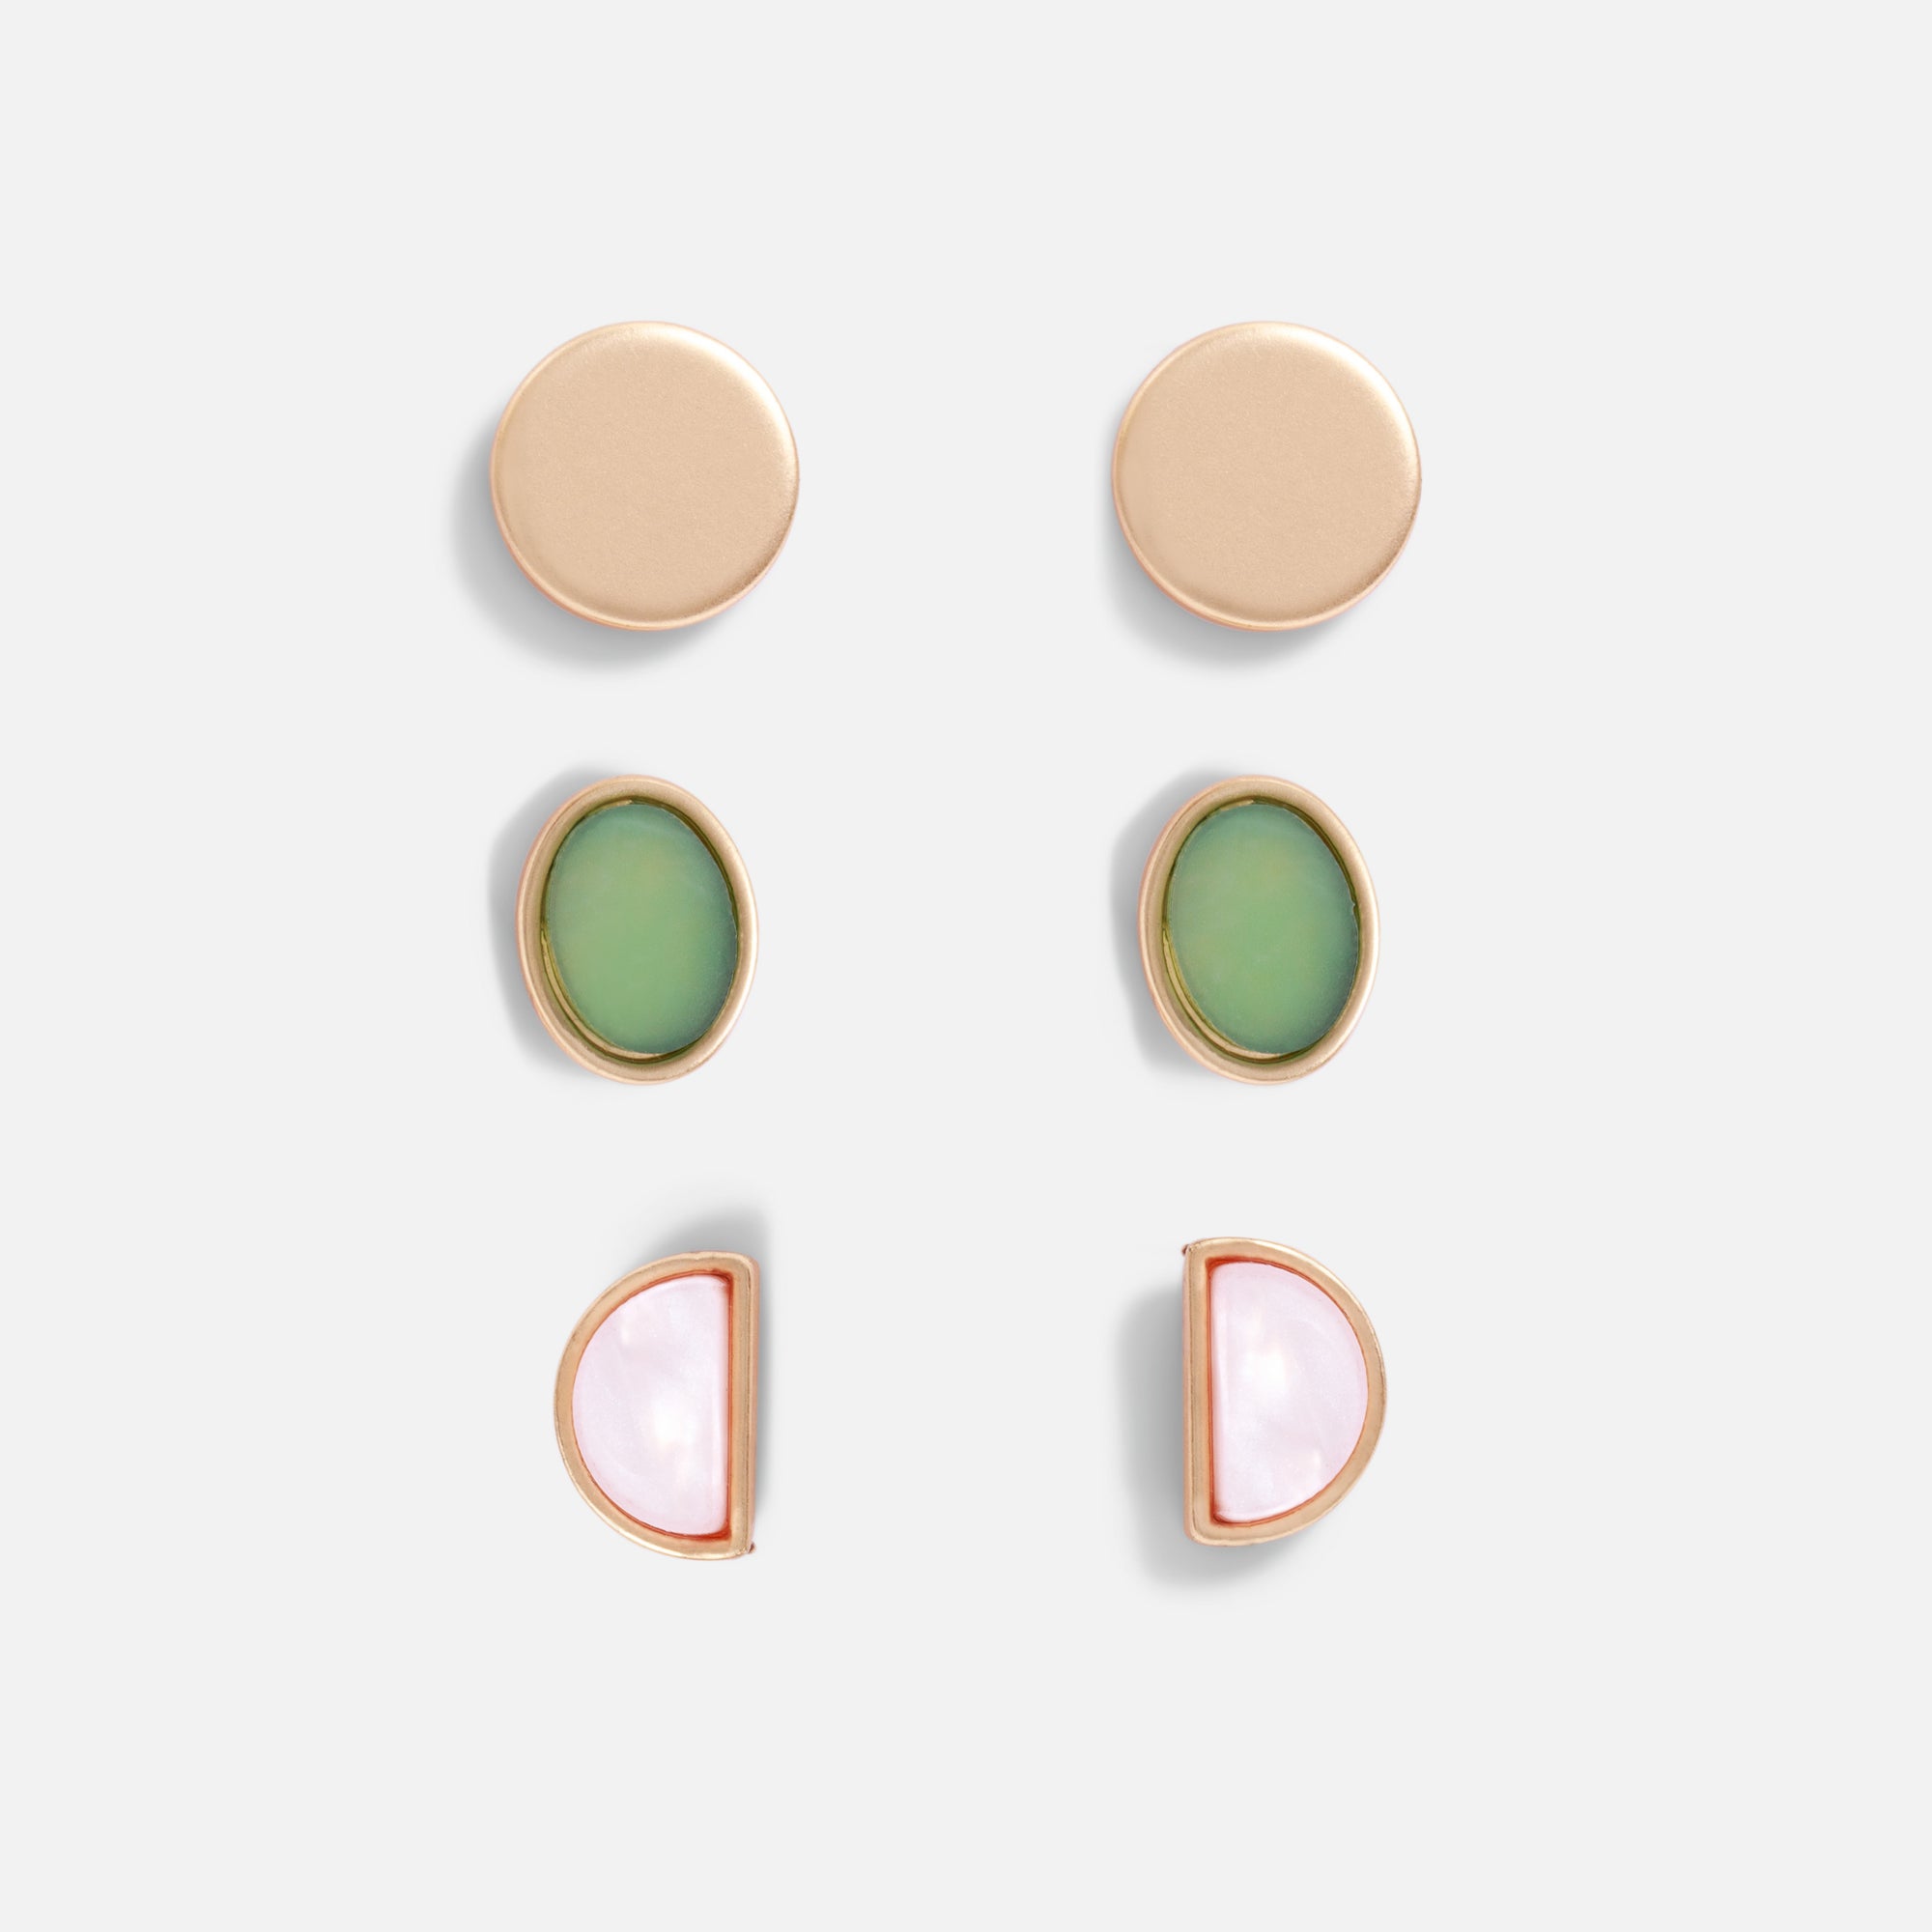 Trio of golden, green and pearl stone earrings